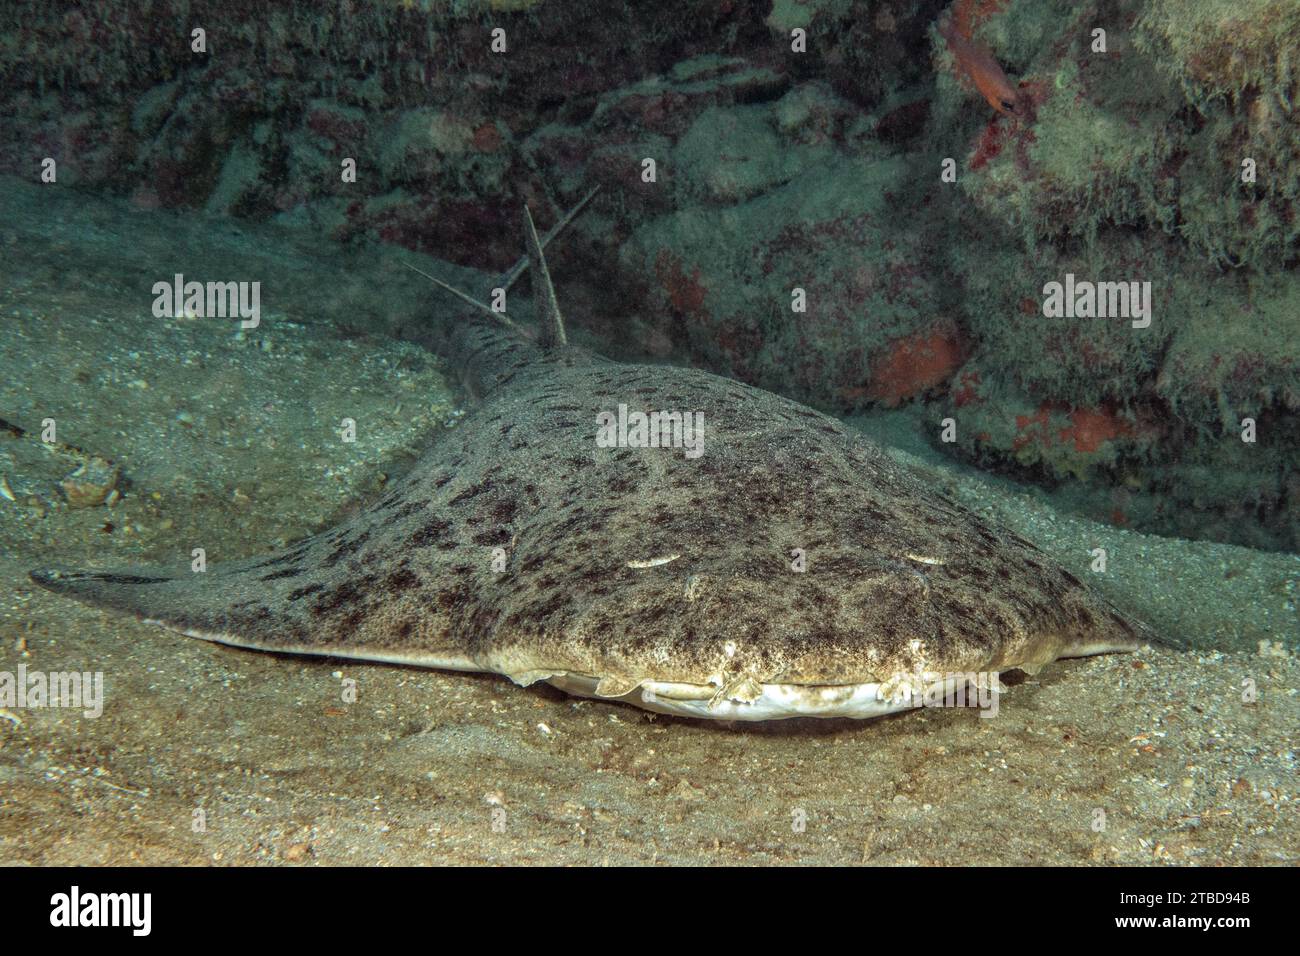 Photograph of monkfish (Squatina squatina) lying on sandy seabed in shadow of reef wall rock reef, East Atlantic, Fuerteventura, Canary Islands, Spain Stock Photo